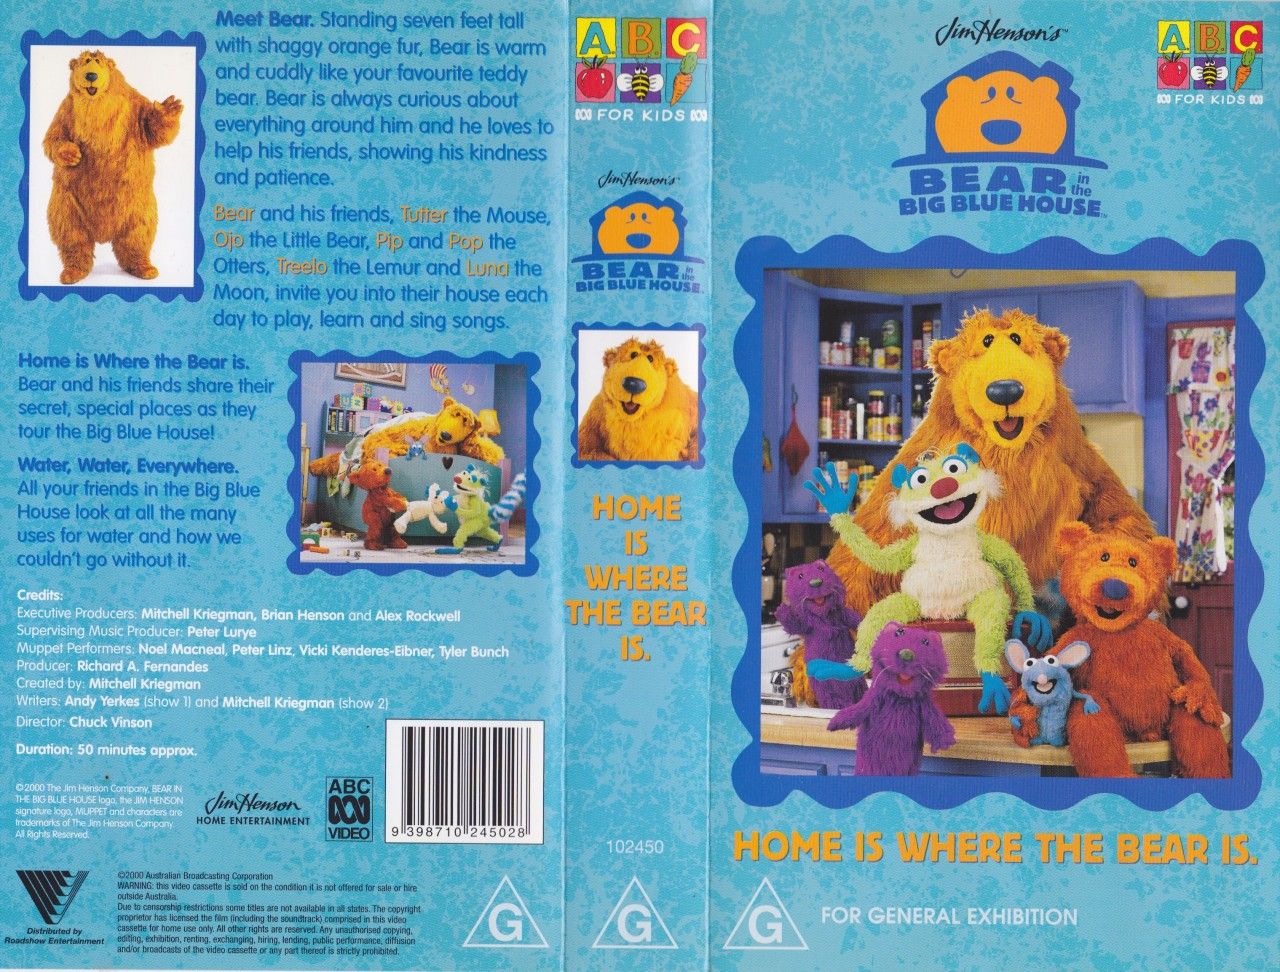 BEAR IN THE BIG BLUE HOUSE HOME IS WHERE THE BEAR IS VHS VIDEO PAL A